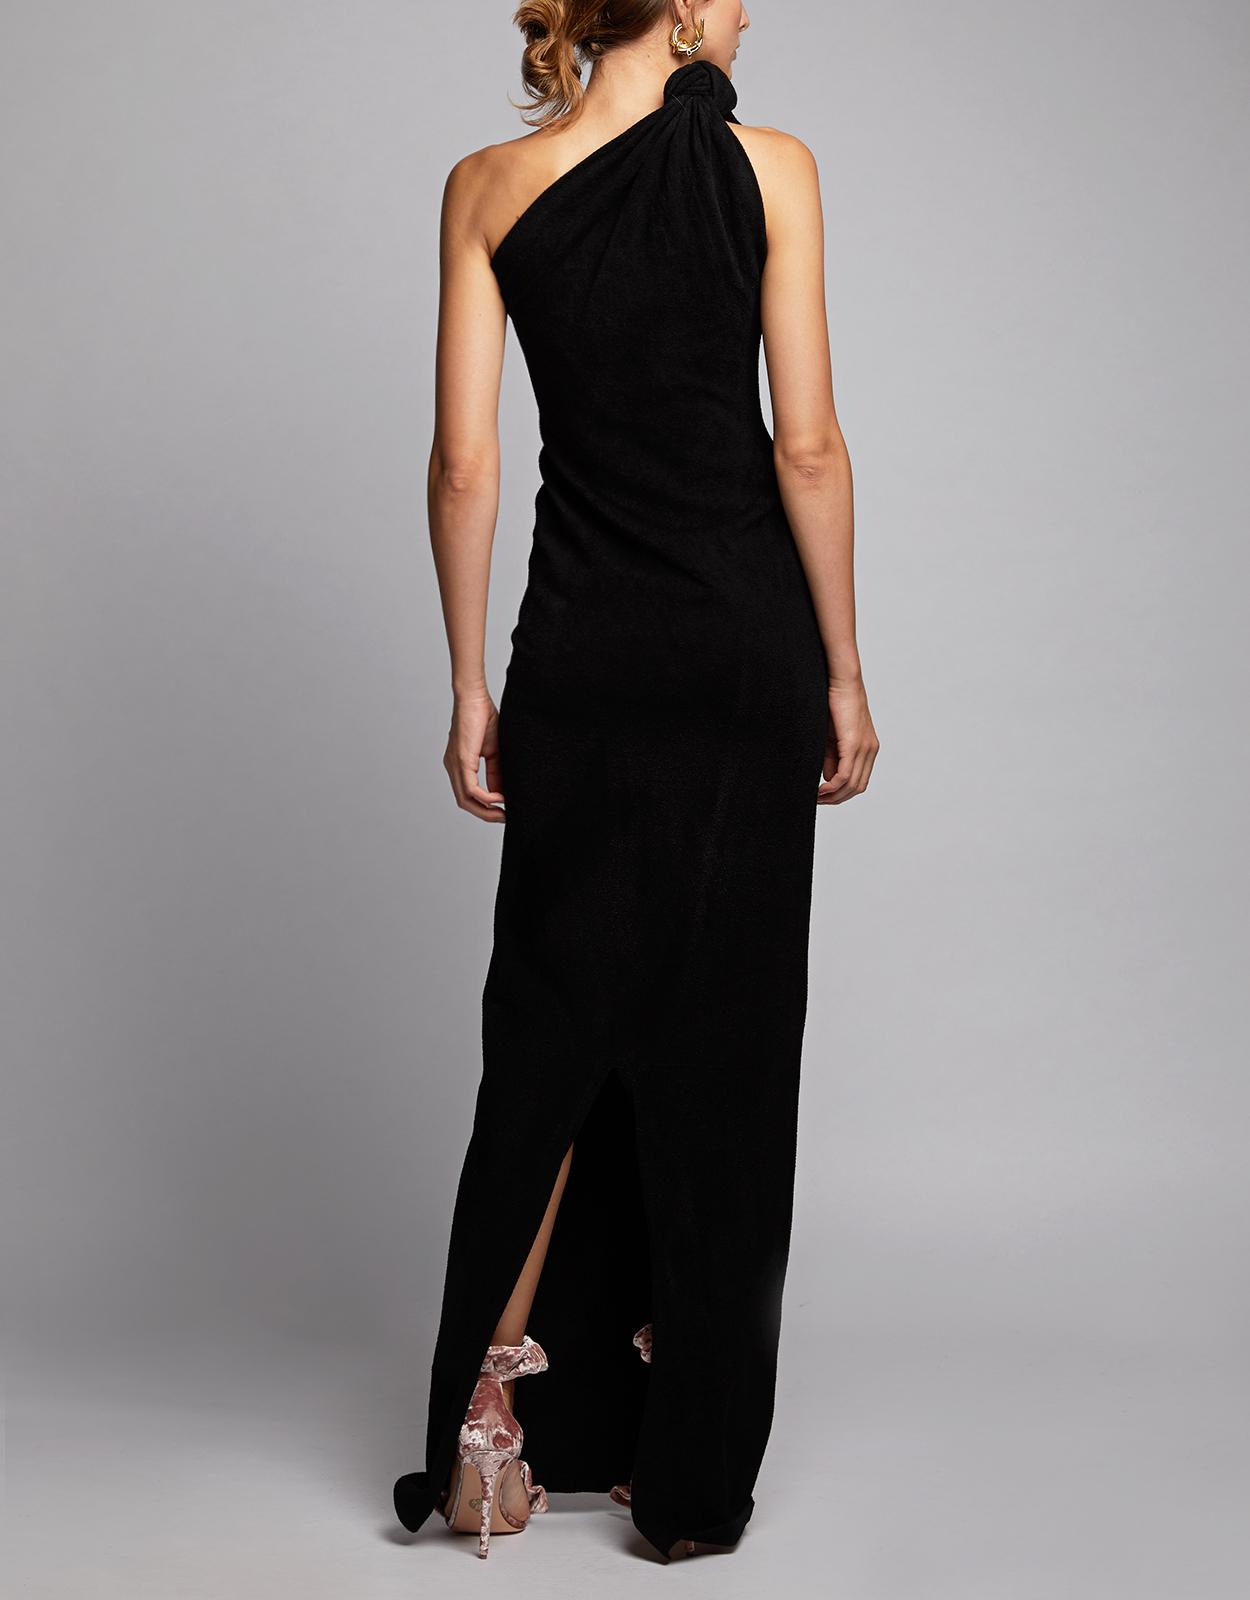 Brandon Maxwell Synthetic Knotted One-shoulder Maxi Dress in Black - Lyst